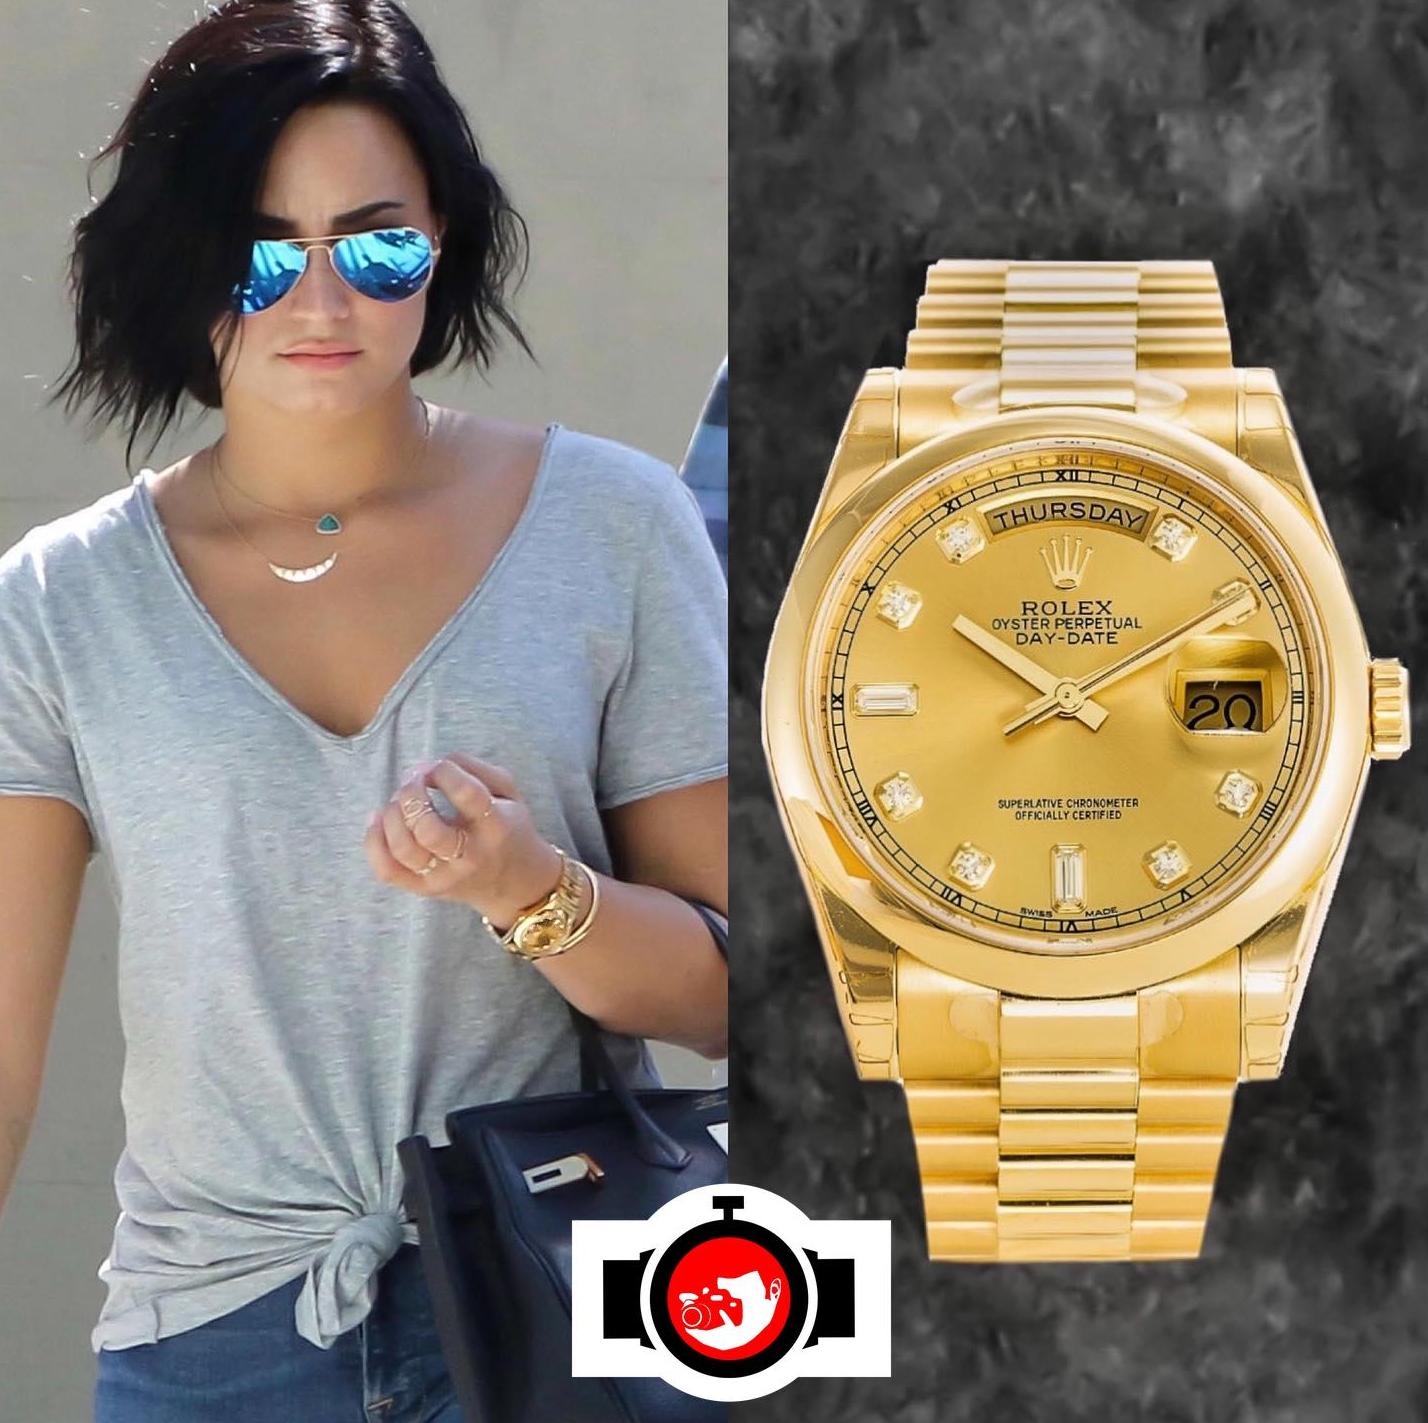 singer Demi Lovato spotted wearing a Rolex 118208